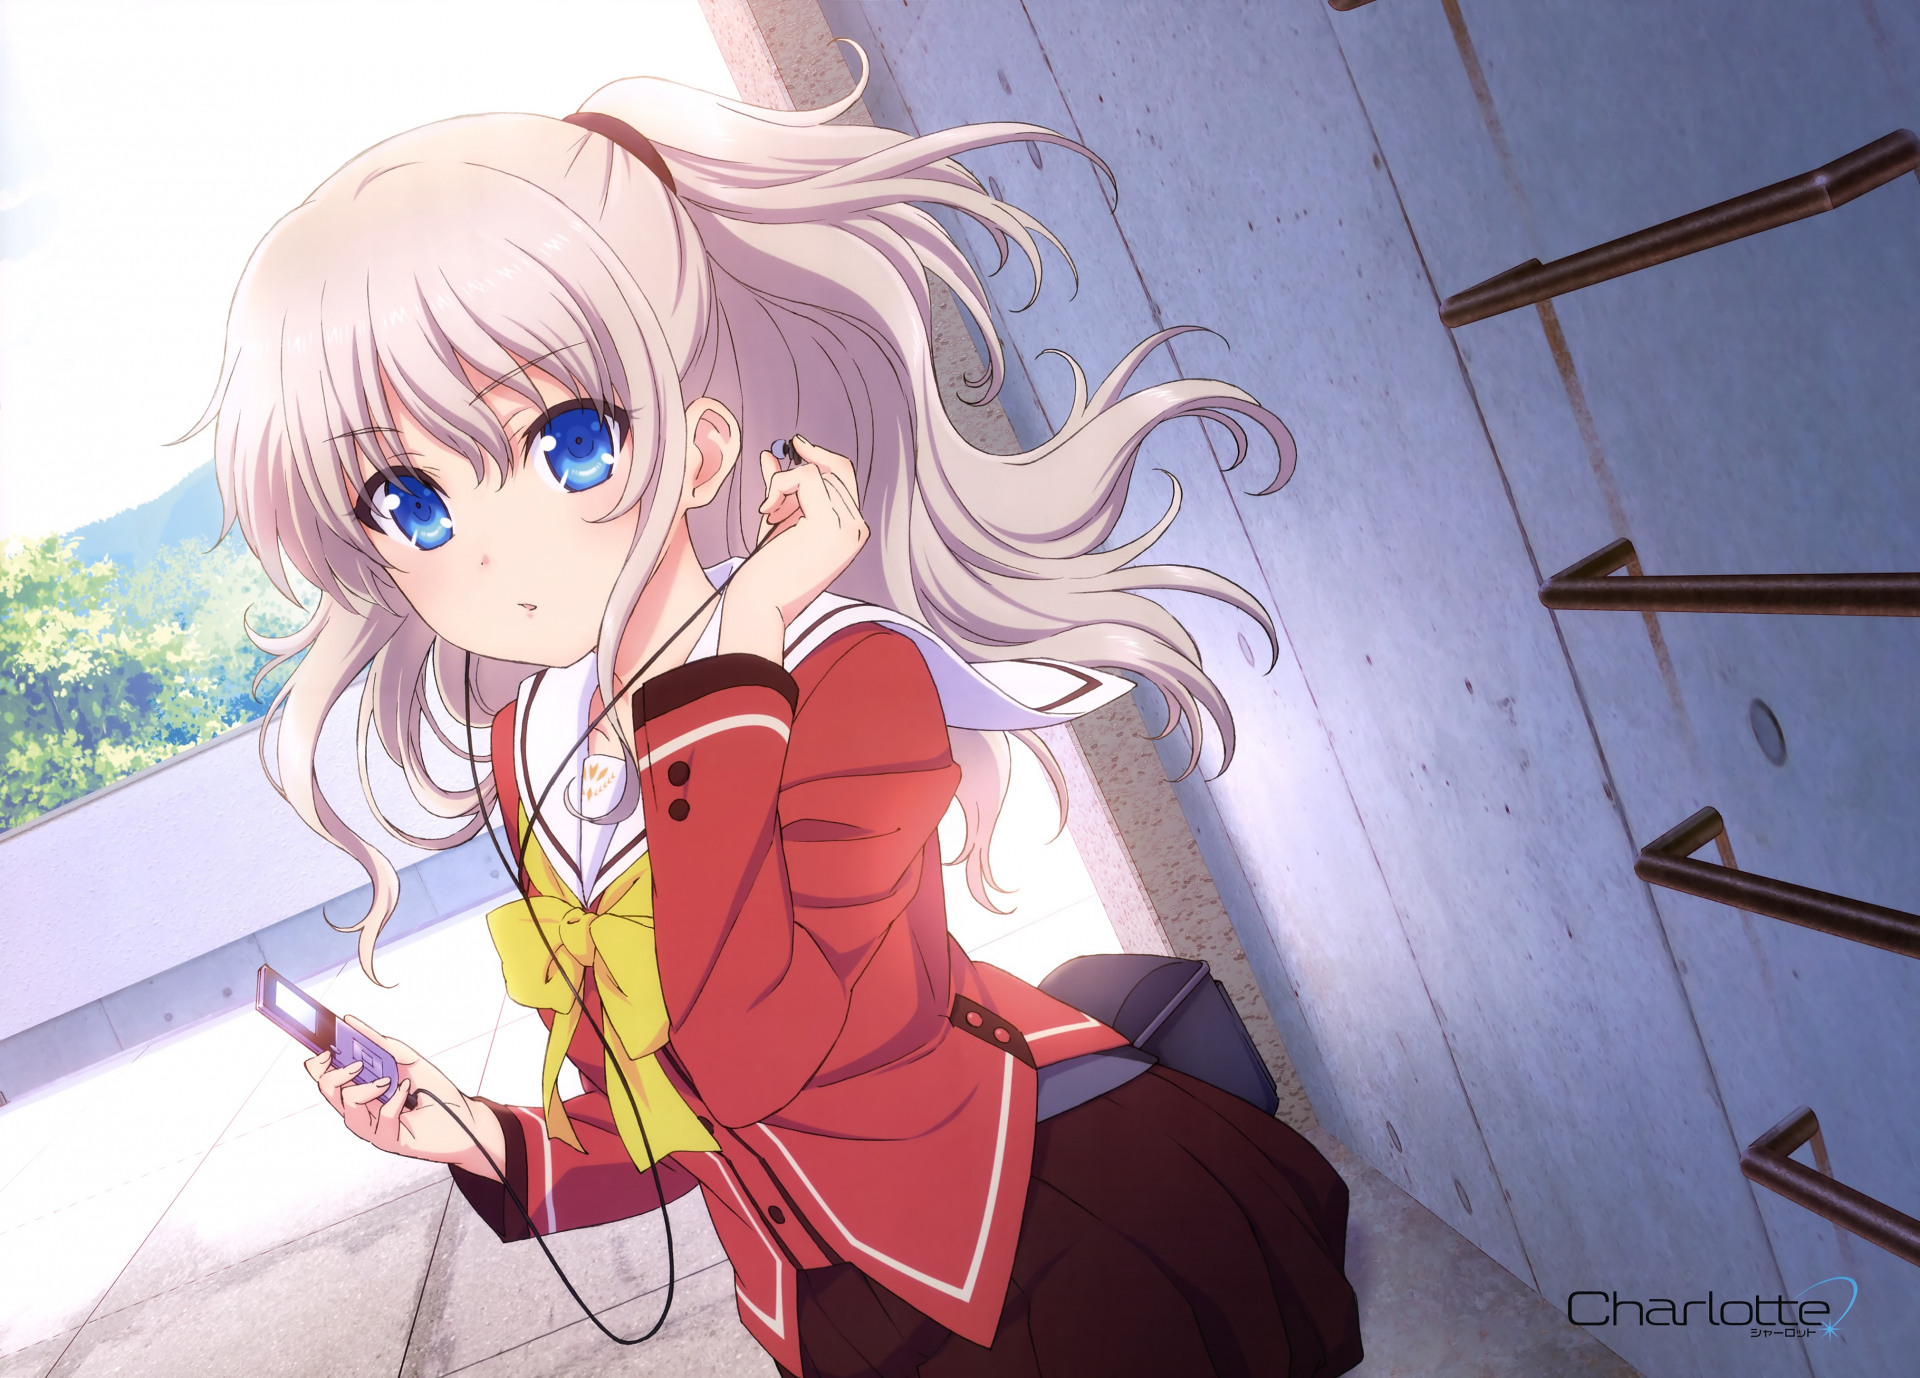 Charlotte: Does Ayumi Really die in the end?